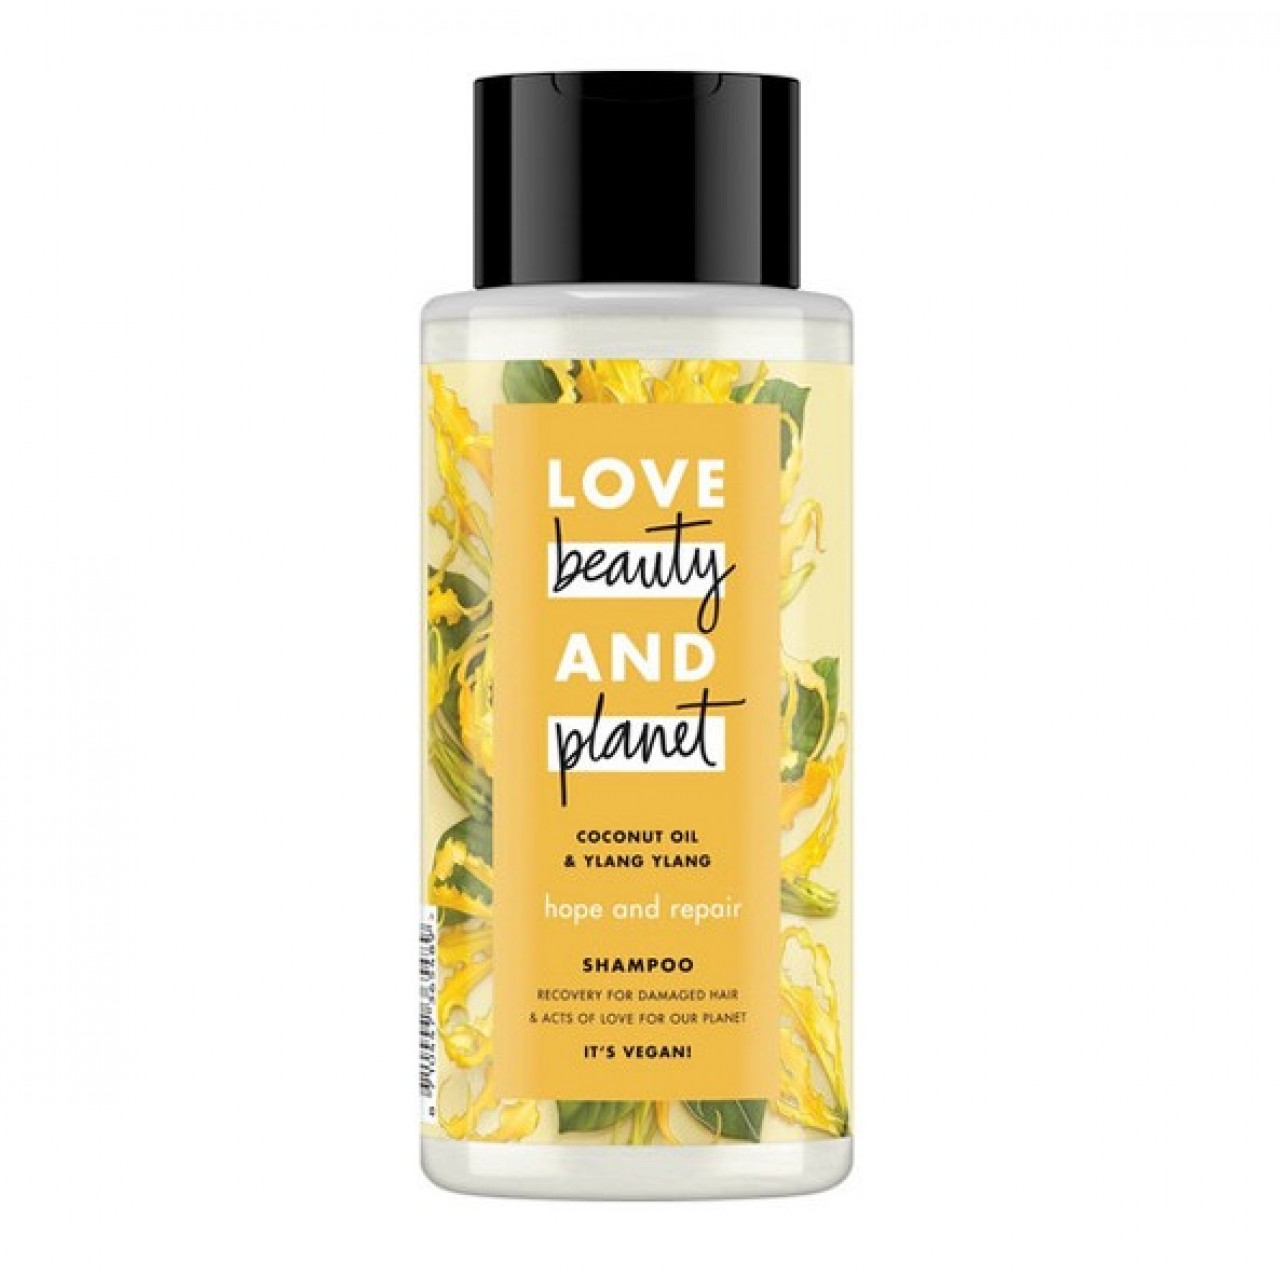 LOVE BEAUTY AND PLANET ΣΑΜΠΟΥΑΝ 400ml COCONUT OIL & YLANG YLANG - 6532